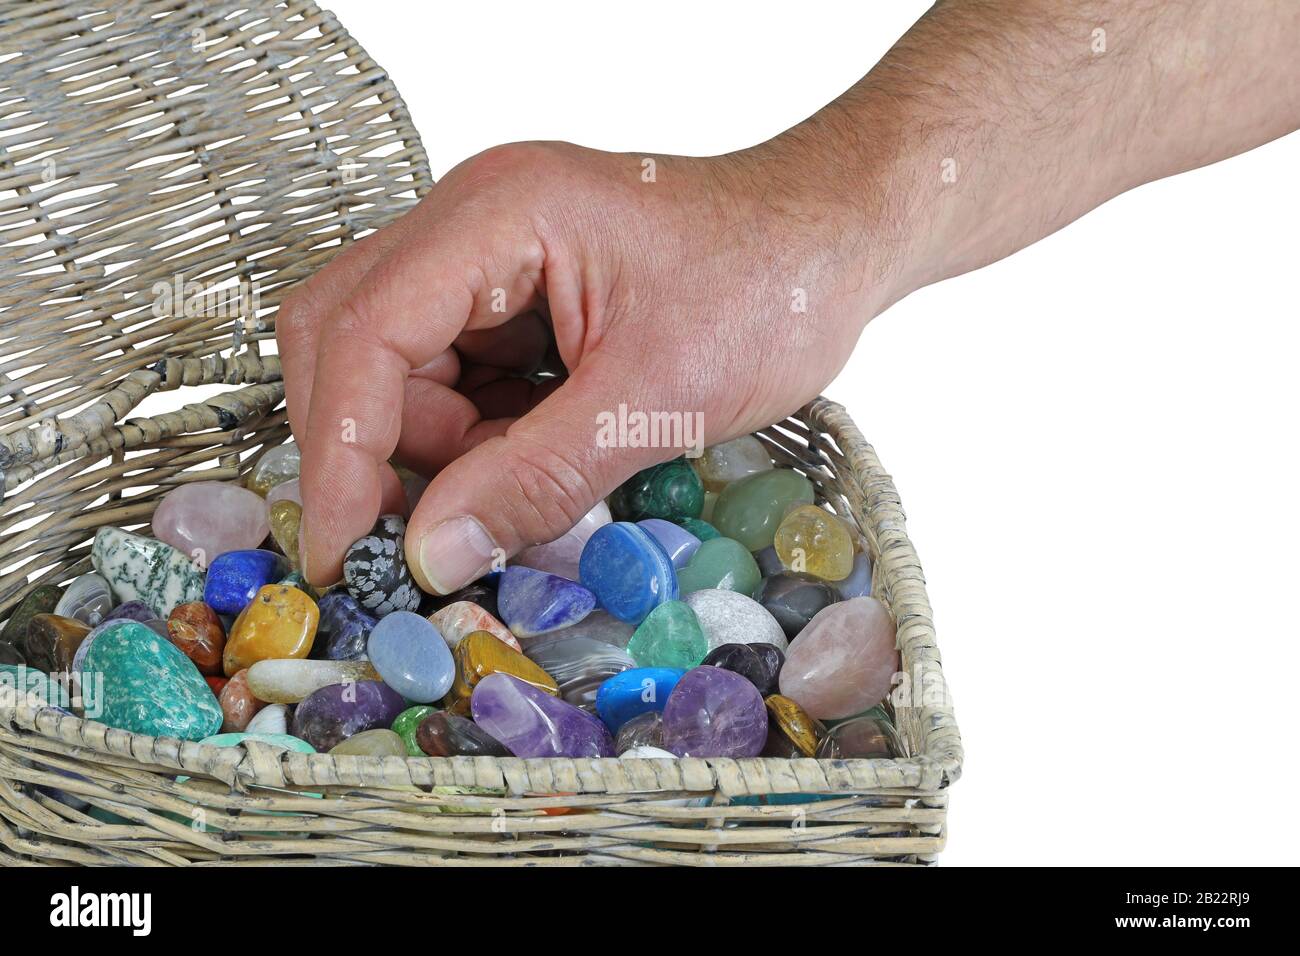 Choosing crystals to help your heal - male hand reaching into wicker basket choosing a healing crystal isolated on a white background with copy space Stock Photo